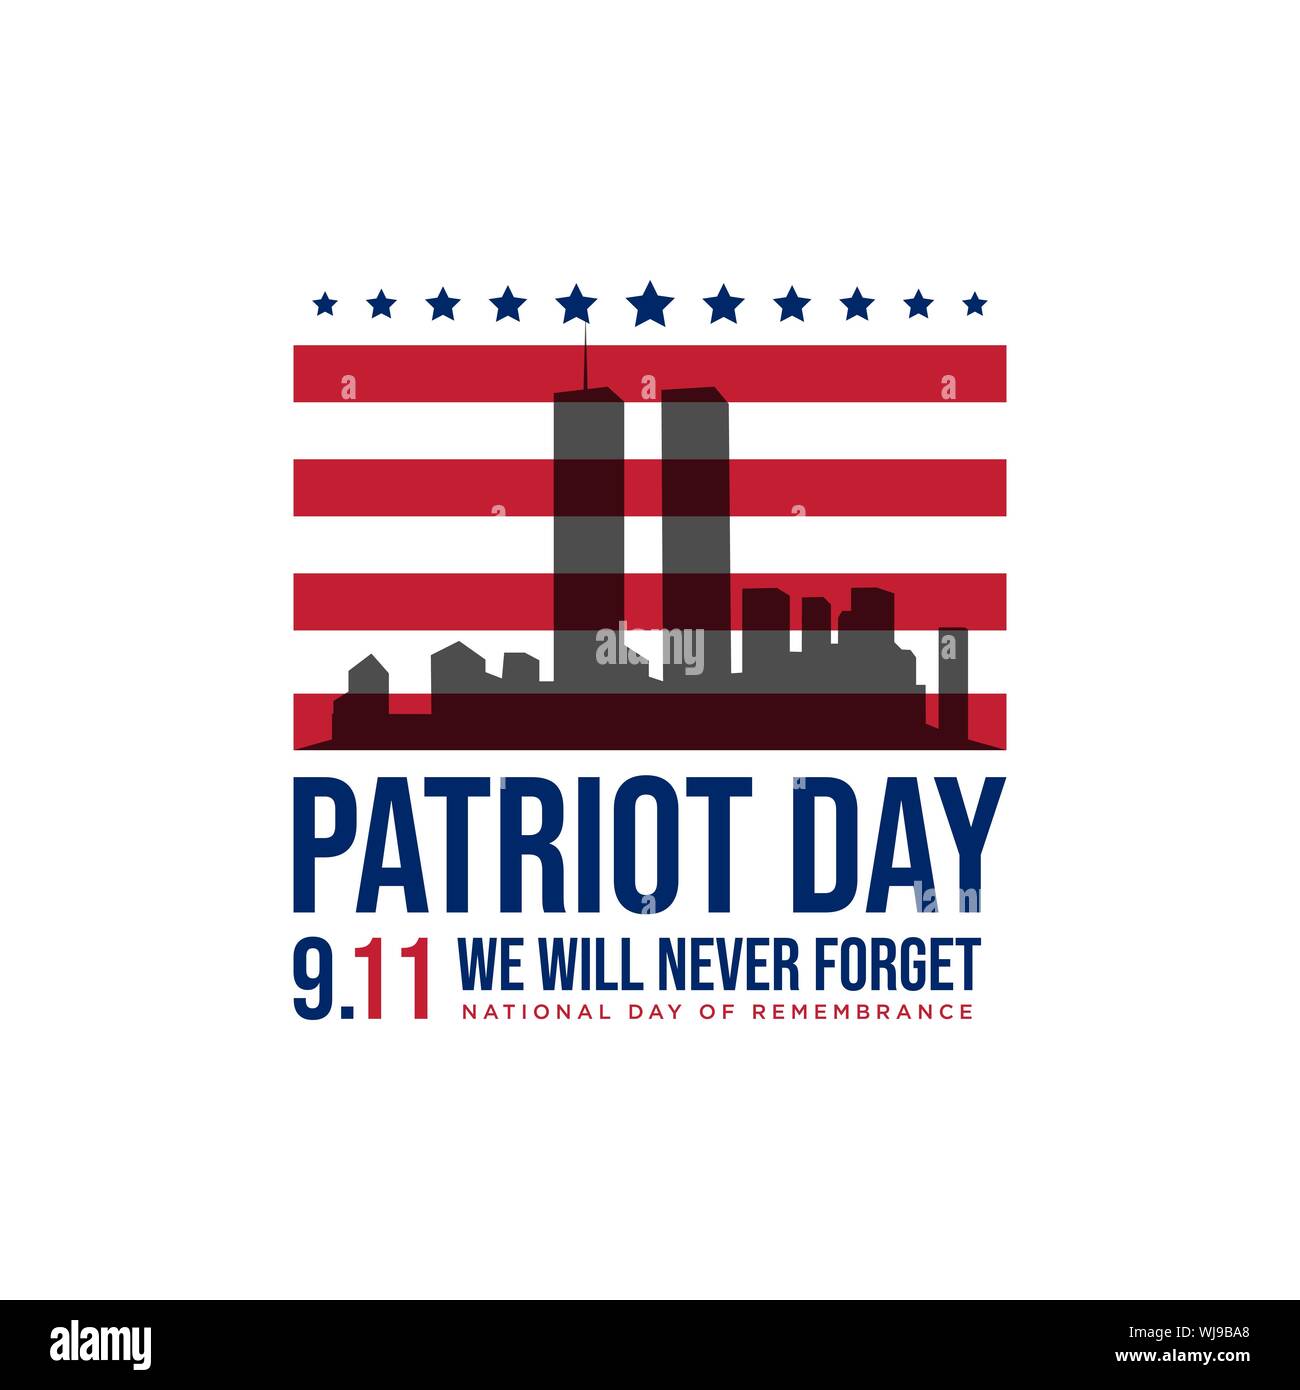 911 patriot day background patriot day september vector image. Never forget 9/11 patriot day Stock Vector